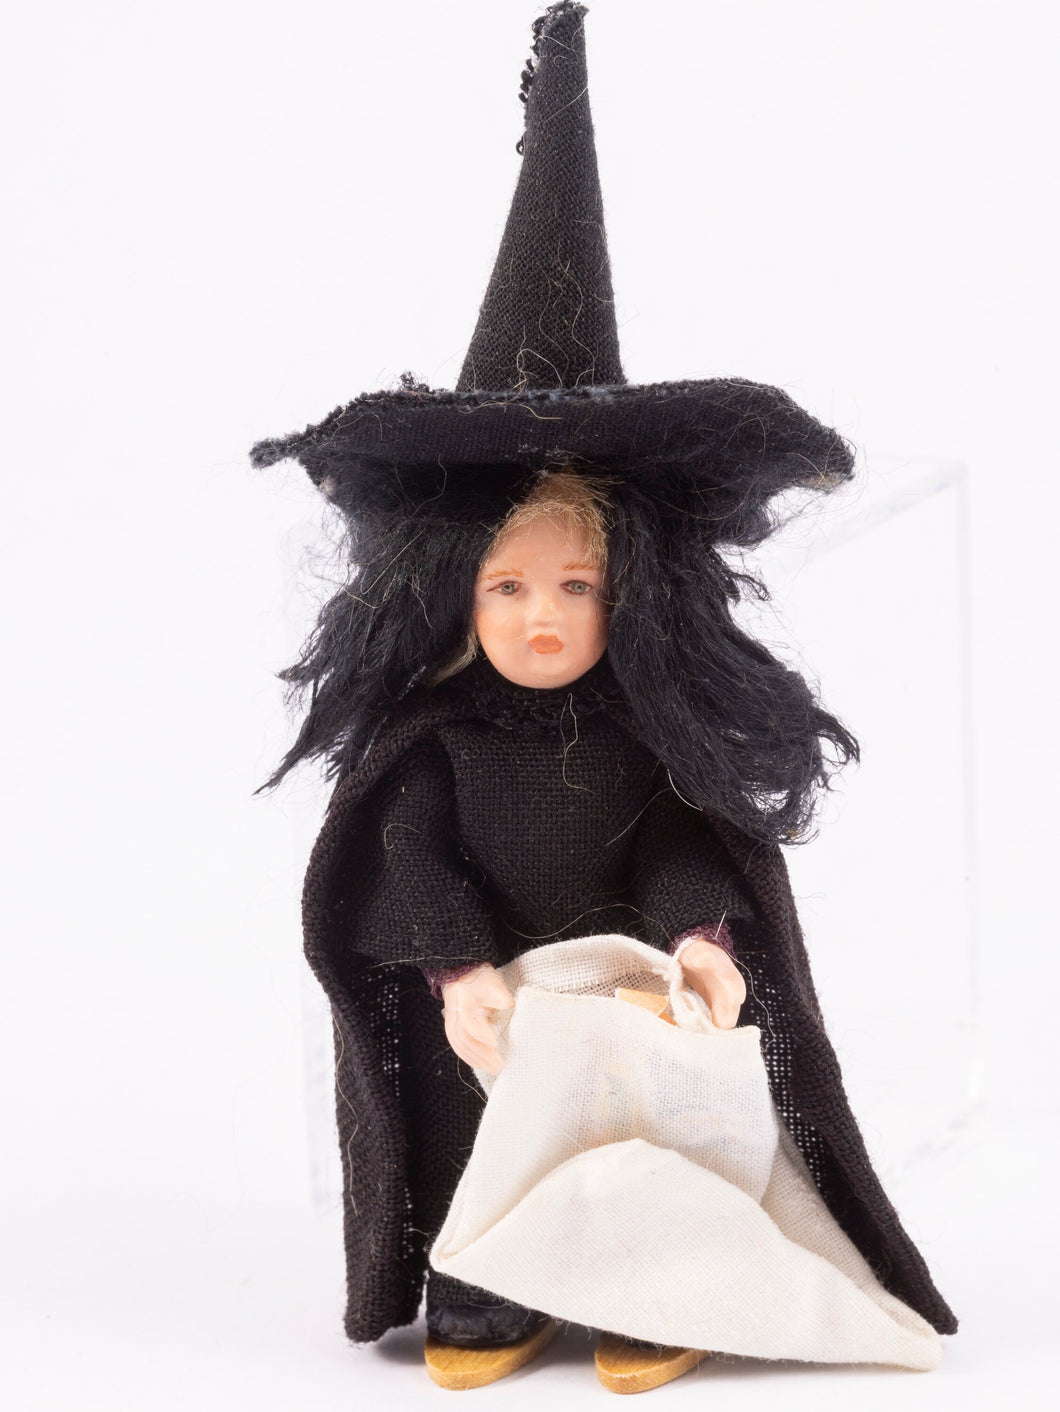 Little Girl Doll Dressed as Witch For Halloween - Trick or Treat